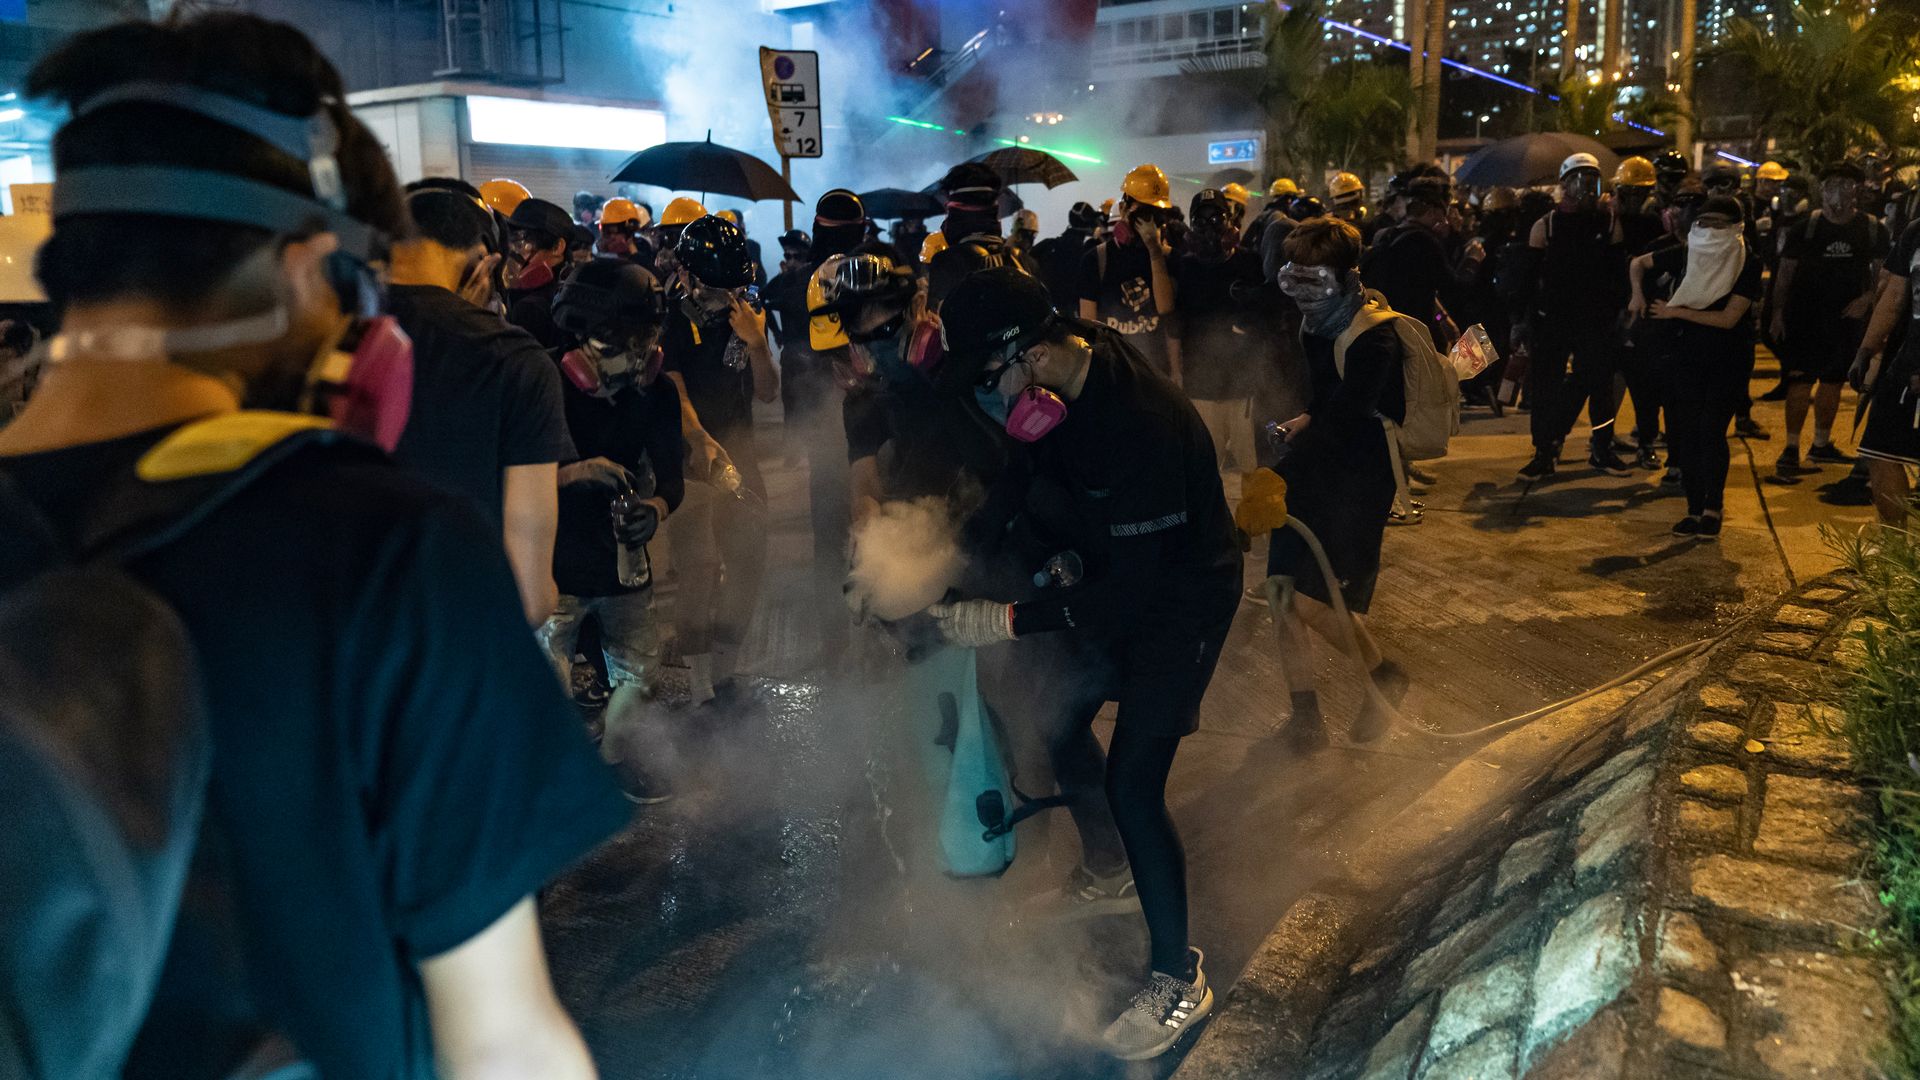 Protesters attempt to put off a tear gas canister during a clash with police in Wong Tai Sin district on August 24, 2019 in Hong Kong